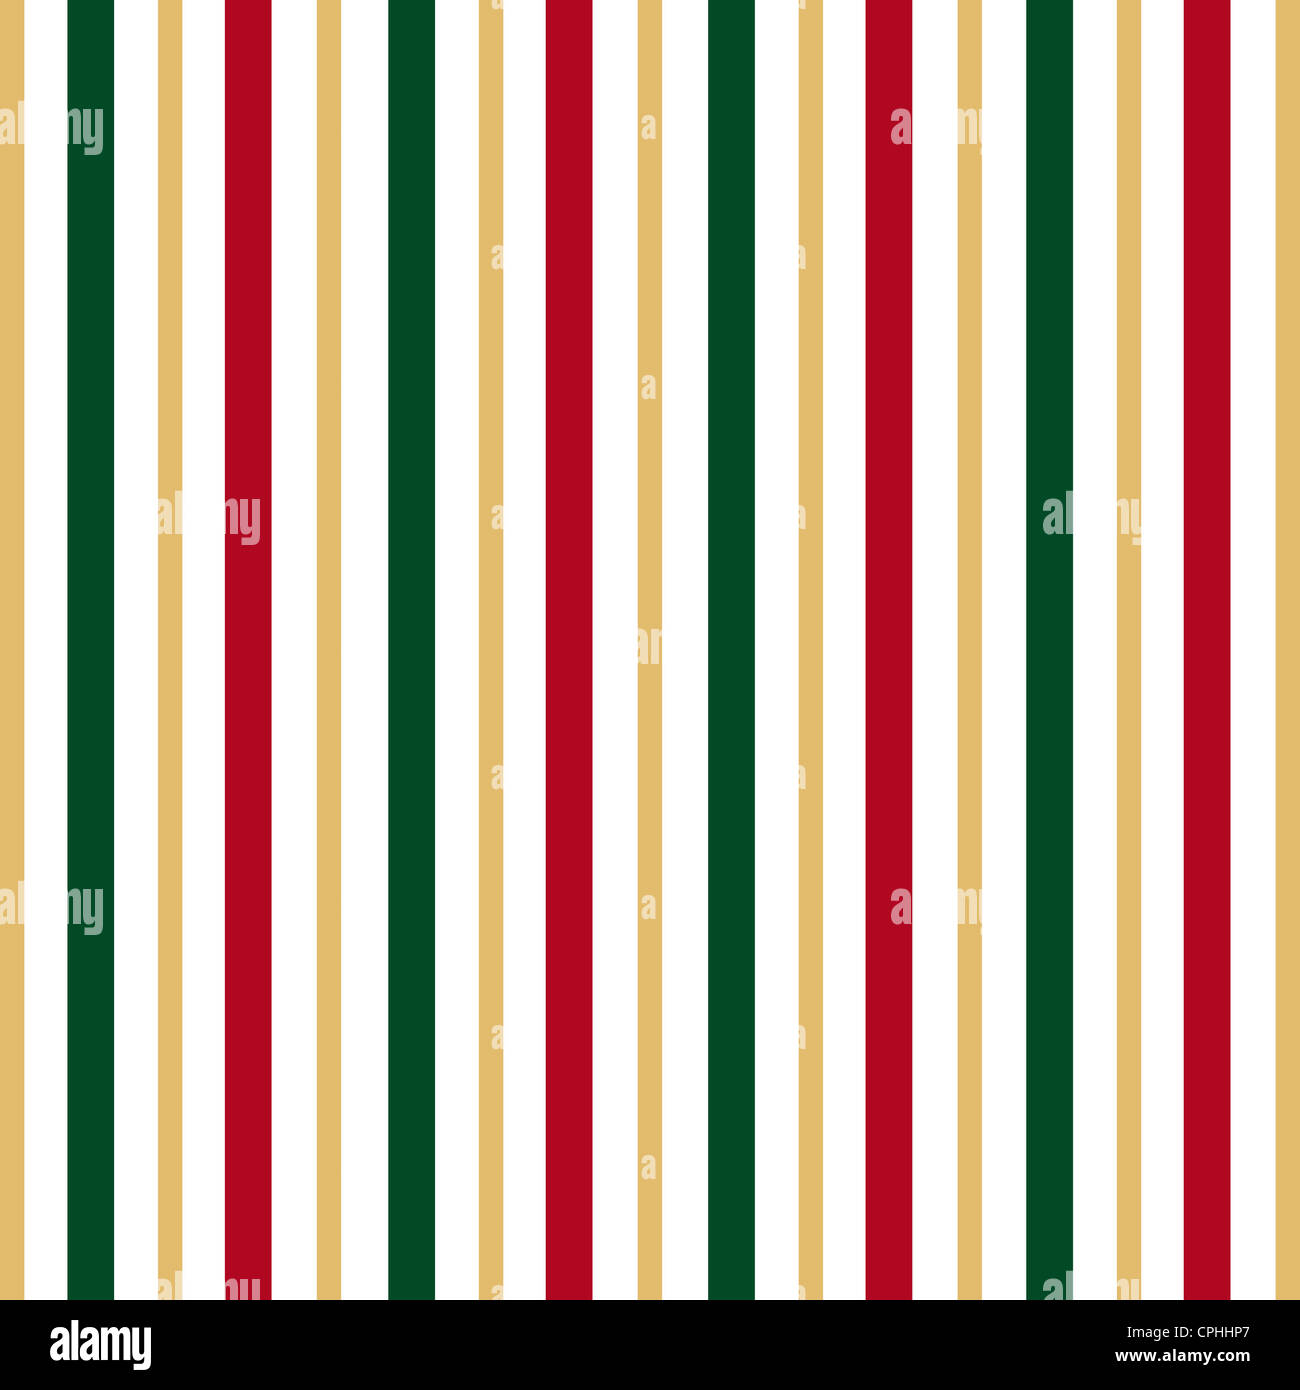 Vertical stripes pattern in red green and gold Stock Photo